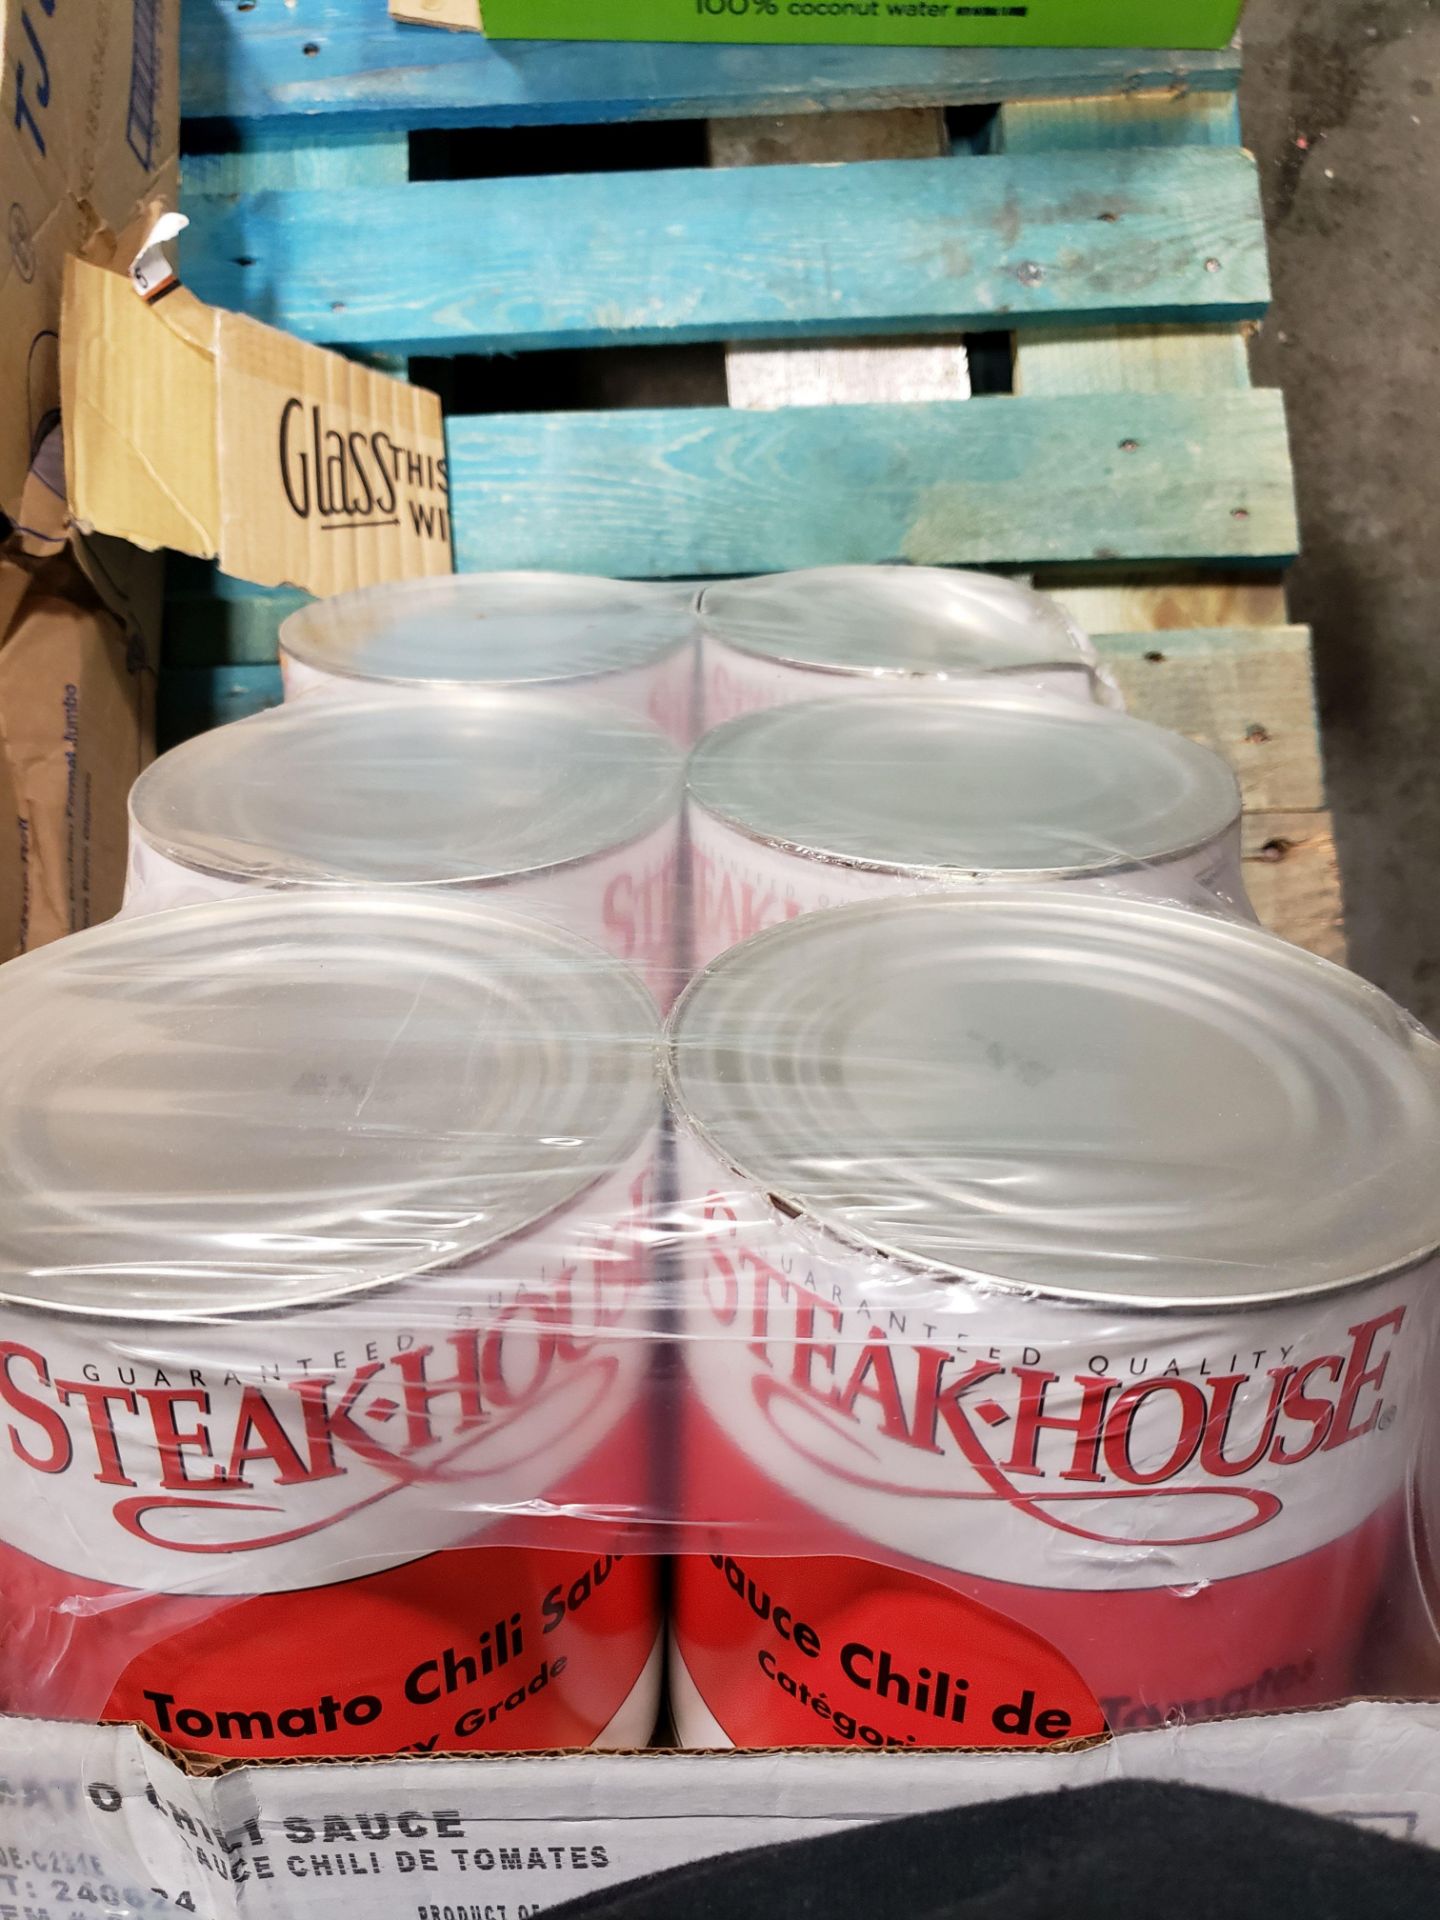 Steakhouse Tomato Chili Sauce - 6 x 2.84lt Cans - Image 2 of 2